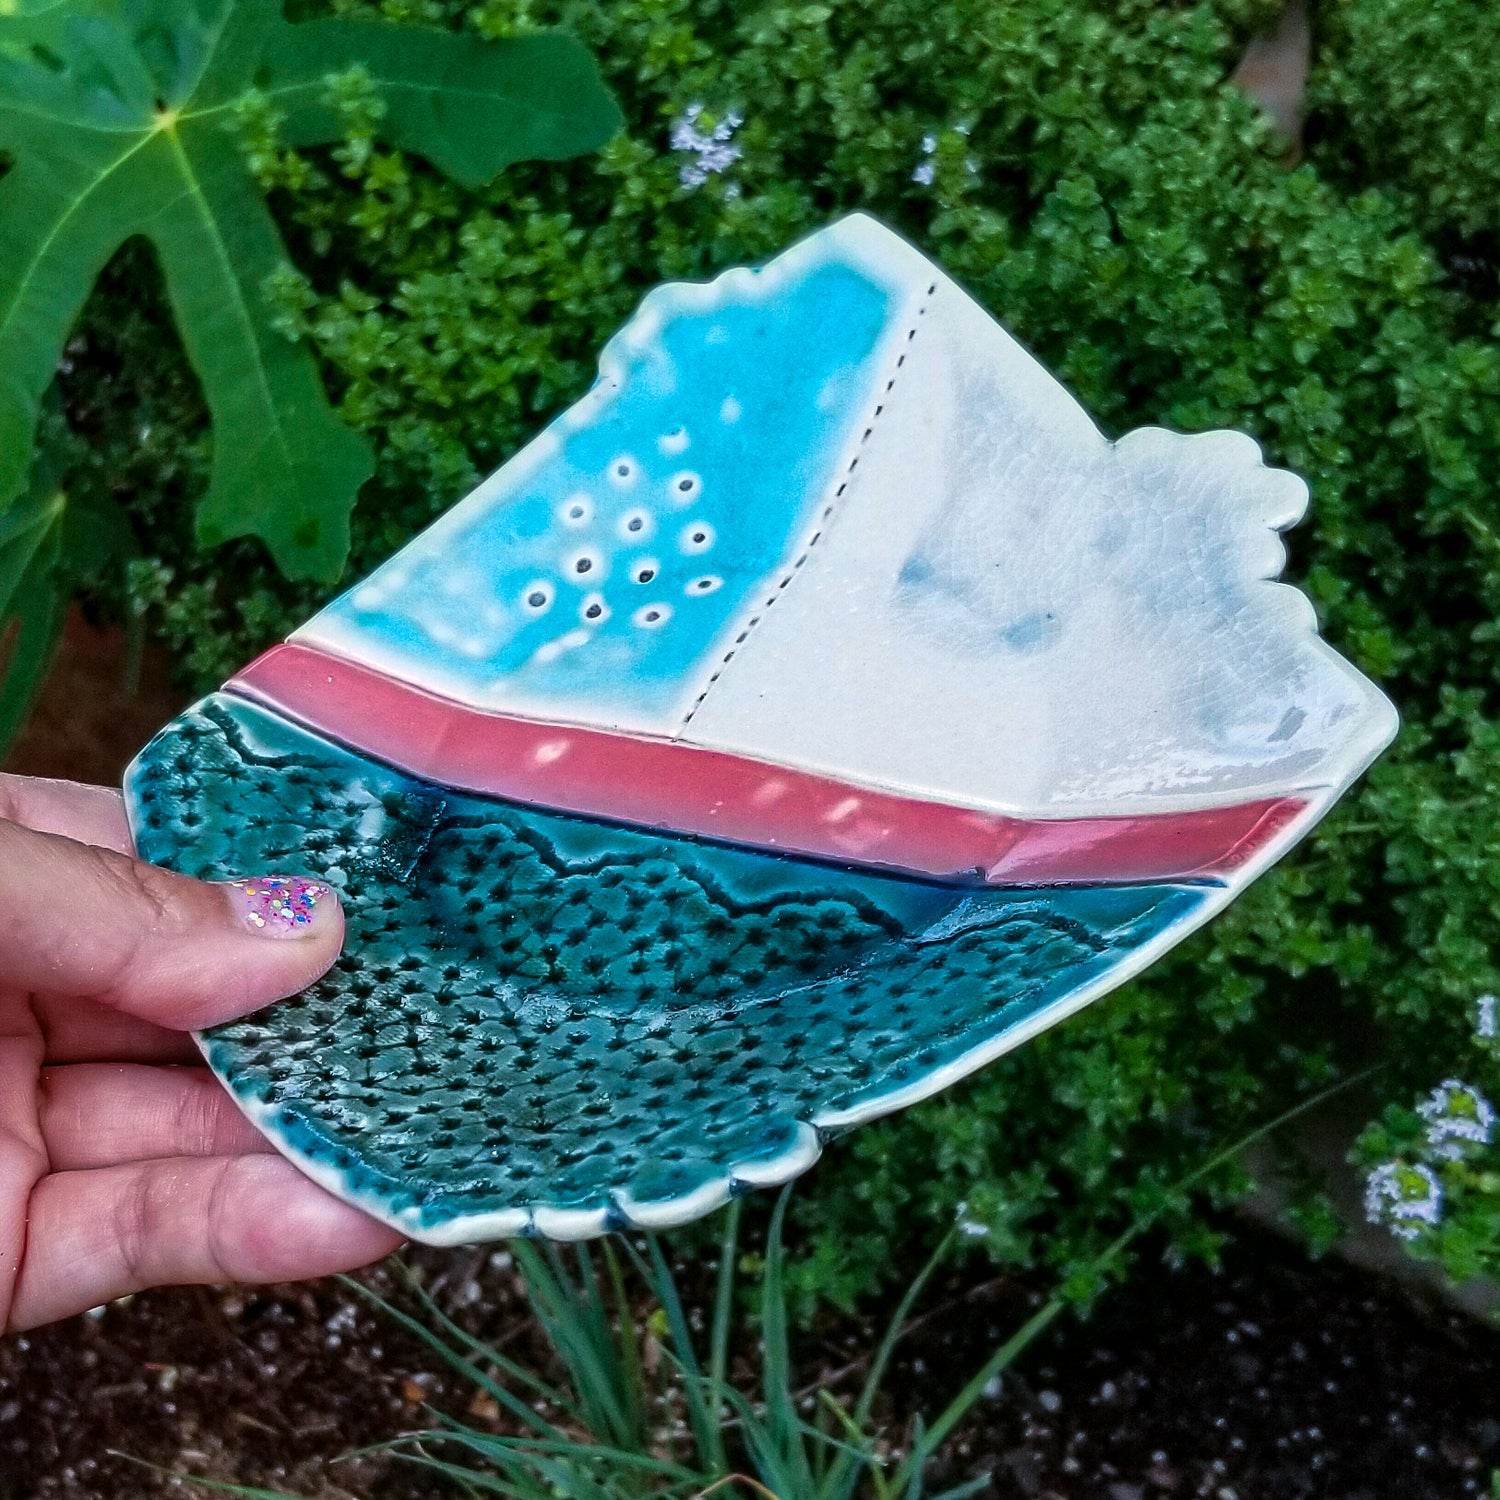 Handmade porcelain ceramic soda fired dish multi color with pressed textures